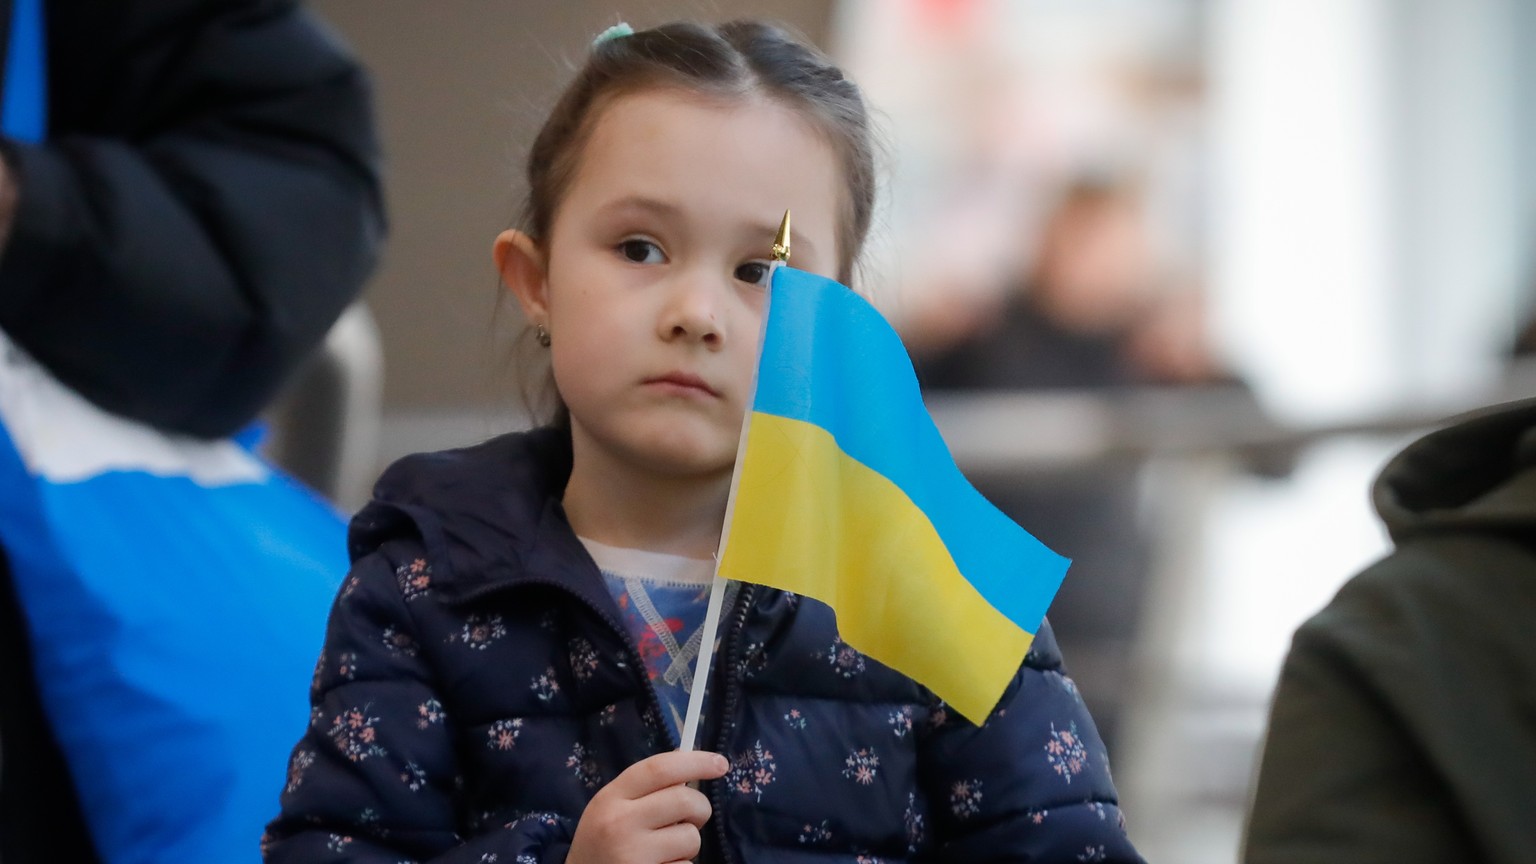 epa09842599 A young girl from a group of refugees who fled Ukraine following the Russian invasion waves a small Ukrainian flag as she along with others waits for further procedures after arrival by tr ...